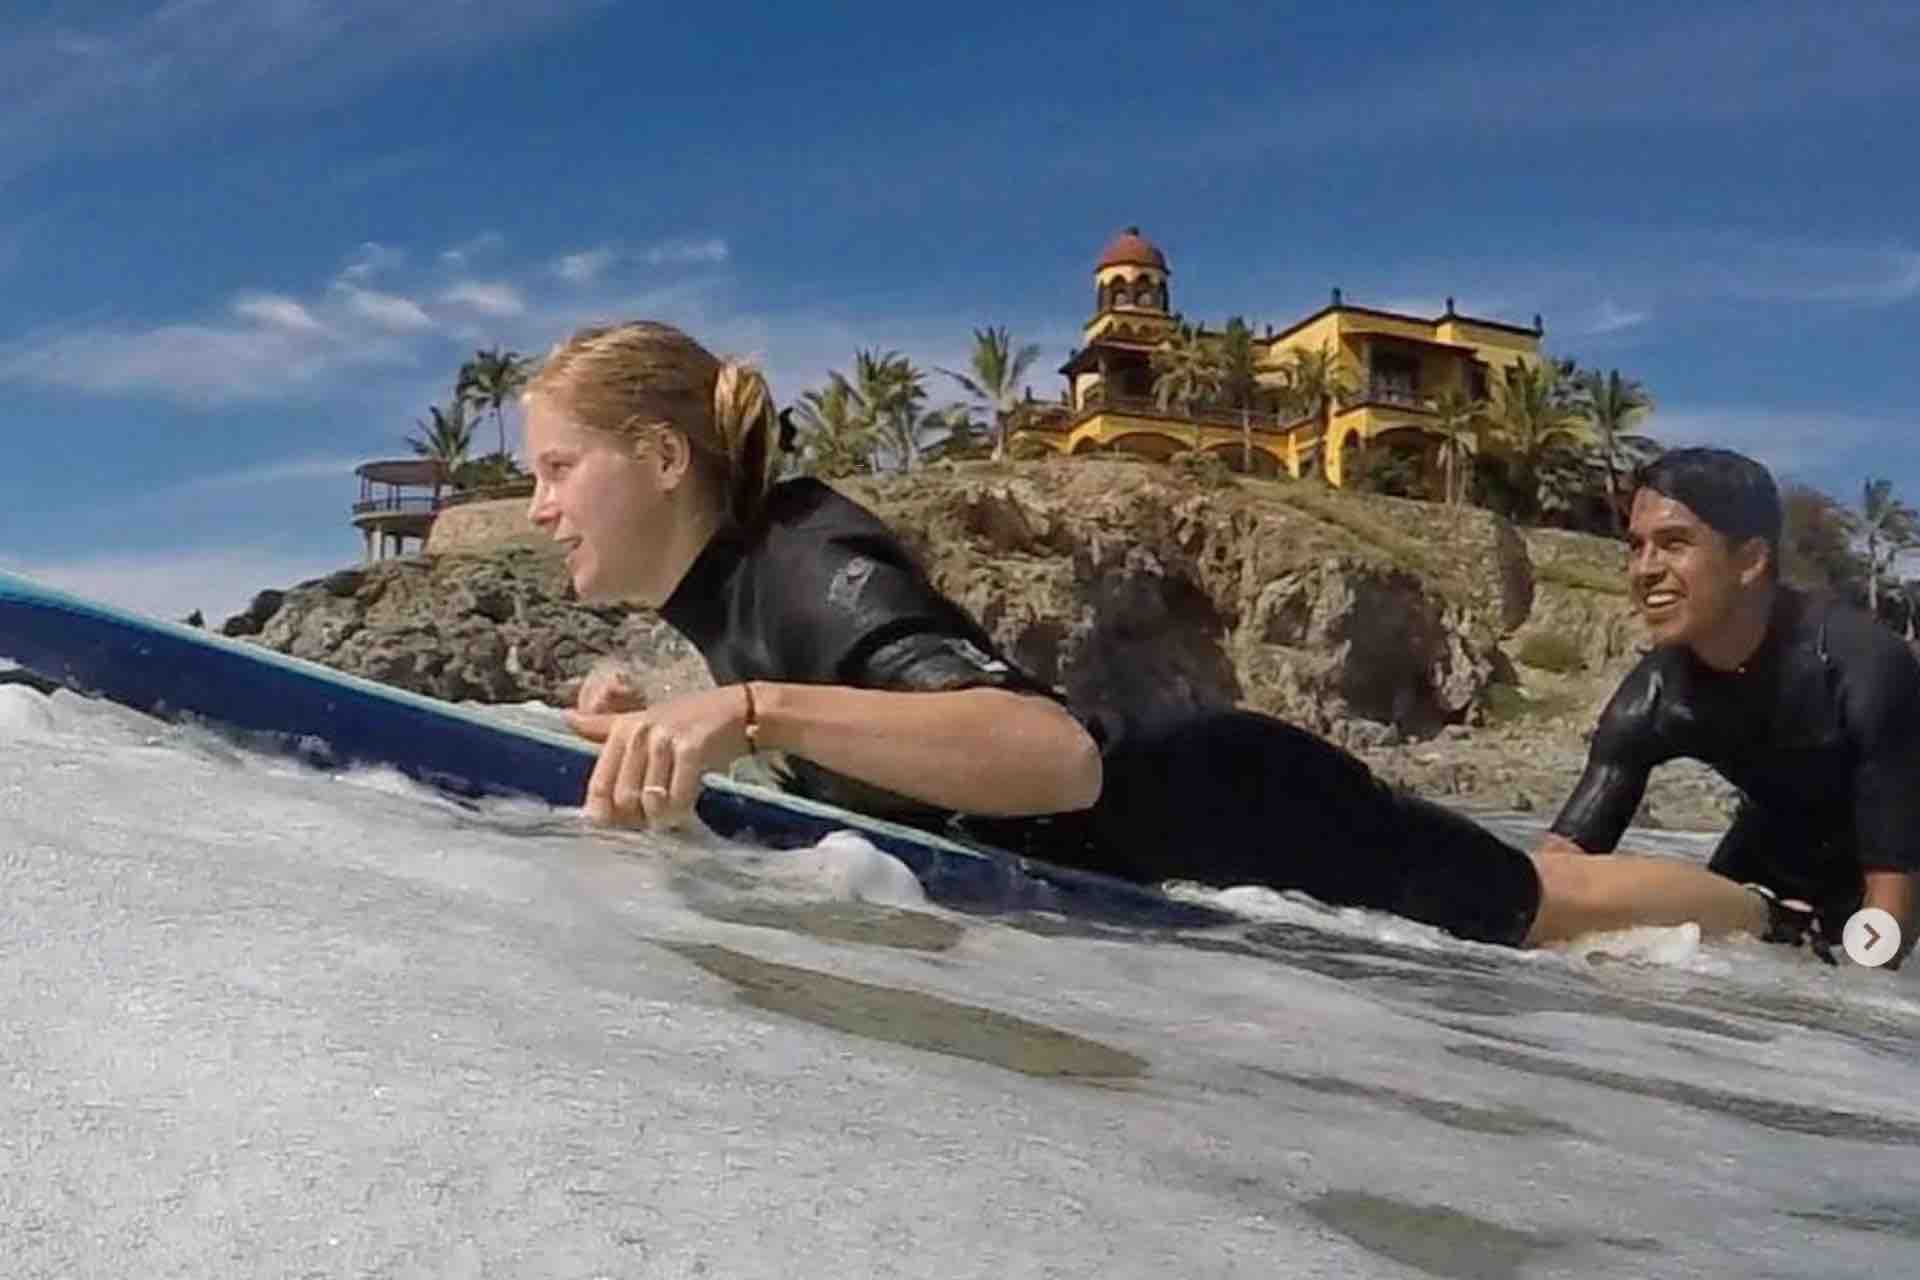 Surfing Cabo San Lucas beginner surfer with instructor